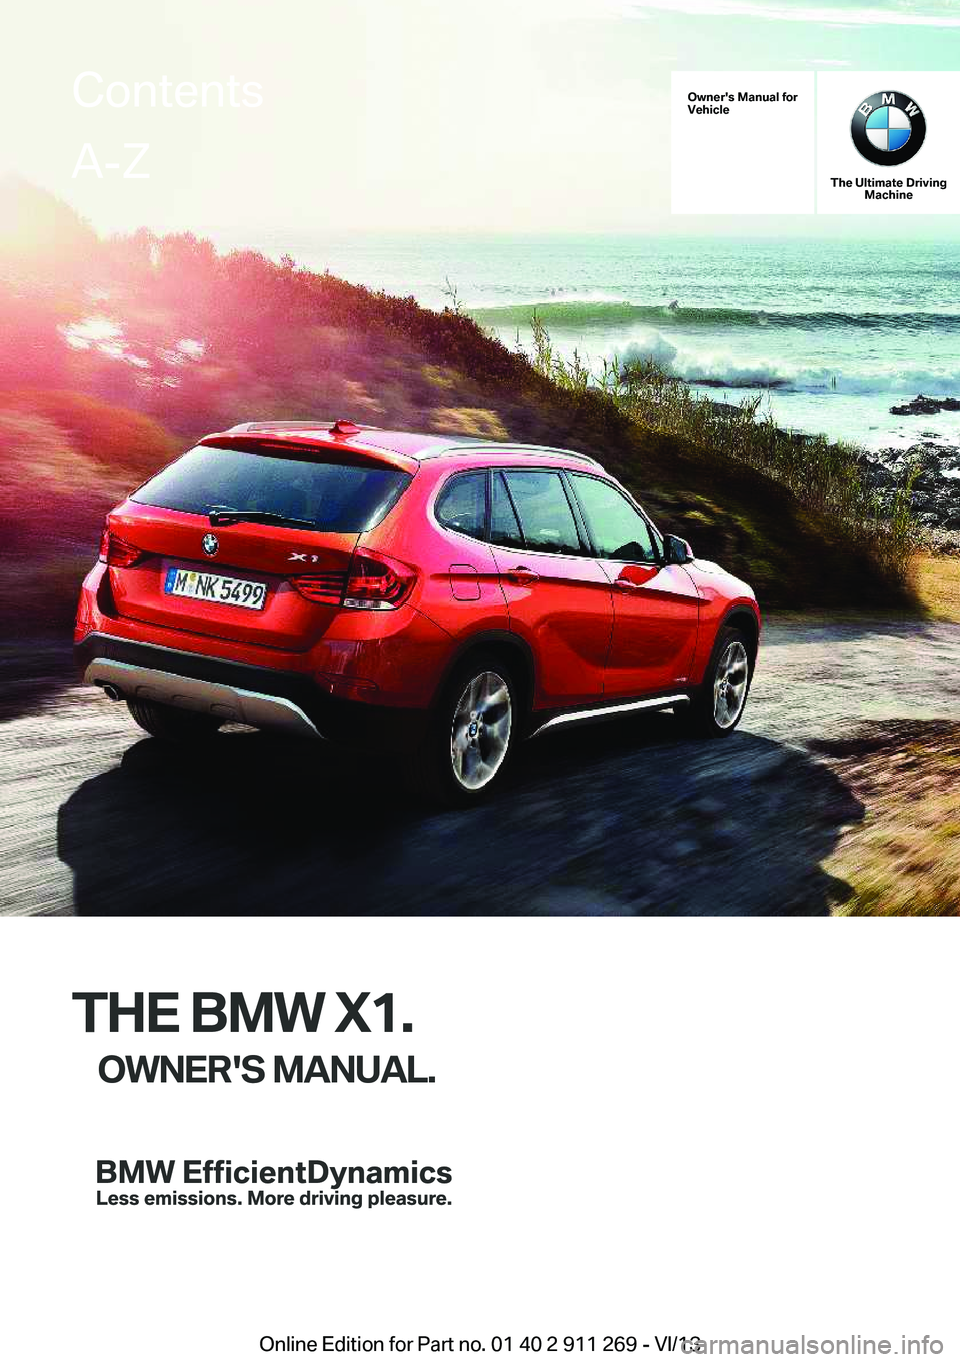 BMW X1 XDRIVE 28I 2014  Owners Manual Owner's Manual for
Vehicle
The Ultimate Driving Machine
THE BMW X1.
OWNER'S MANUAL.
ContentsA-Z
Online Edition for Part no. 01 40 2 911 269 - VI/13   